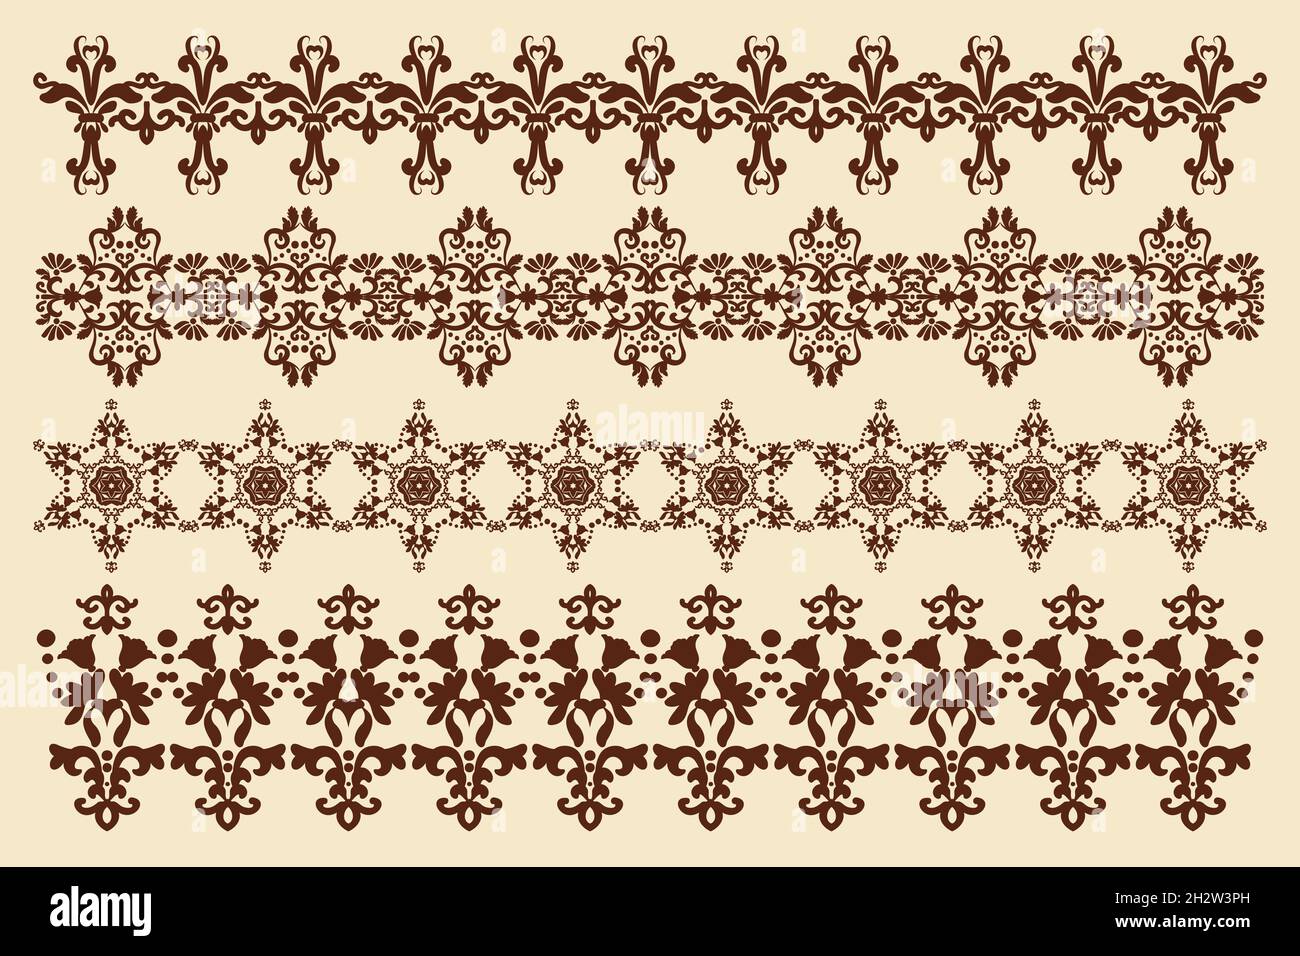 Patterned borders with floral elements. Set of ornaments in vintage style. Design element. Computer graphics. Stock Vector